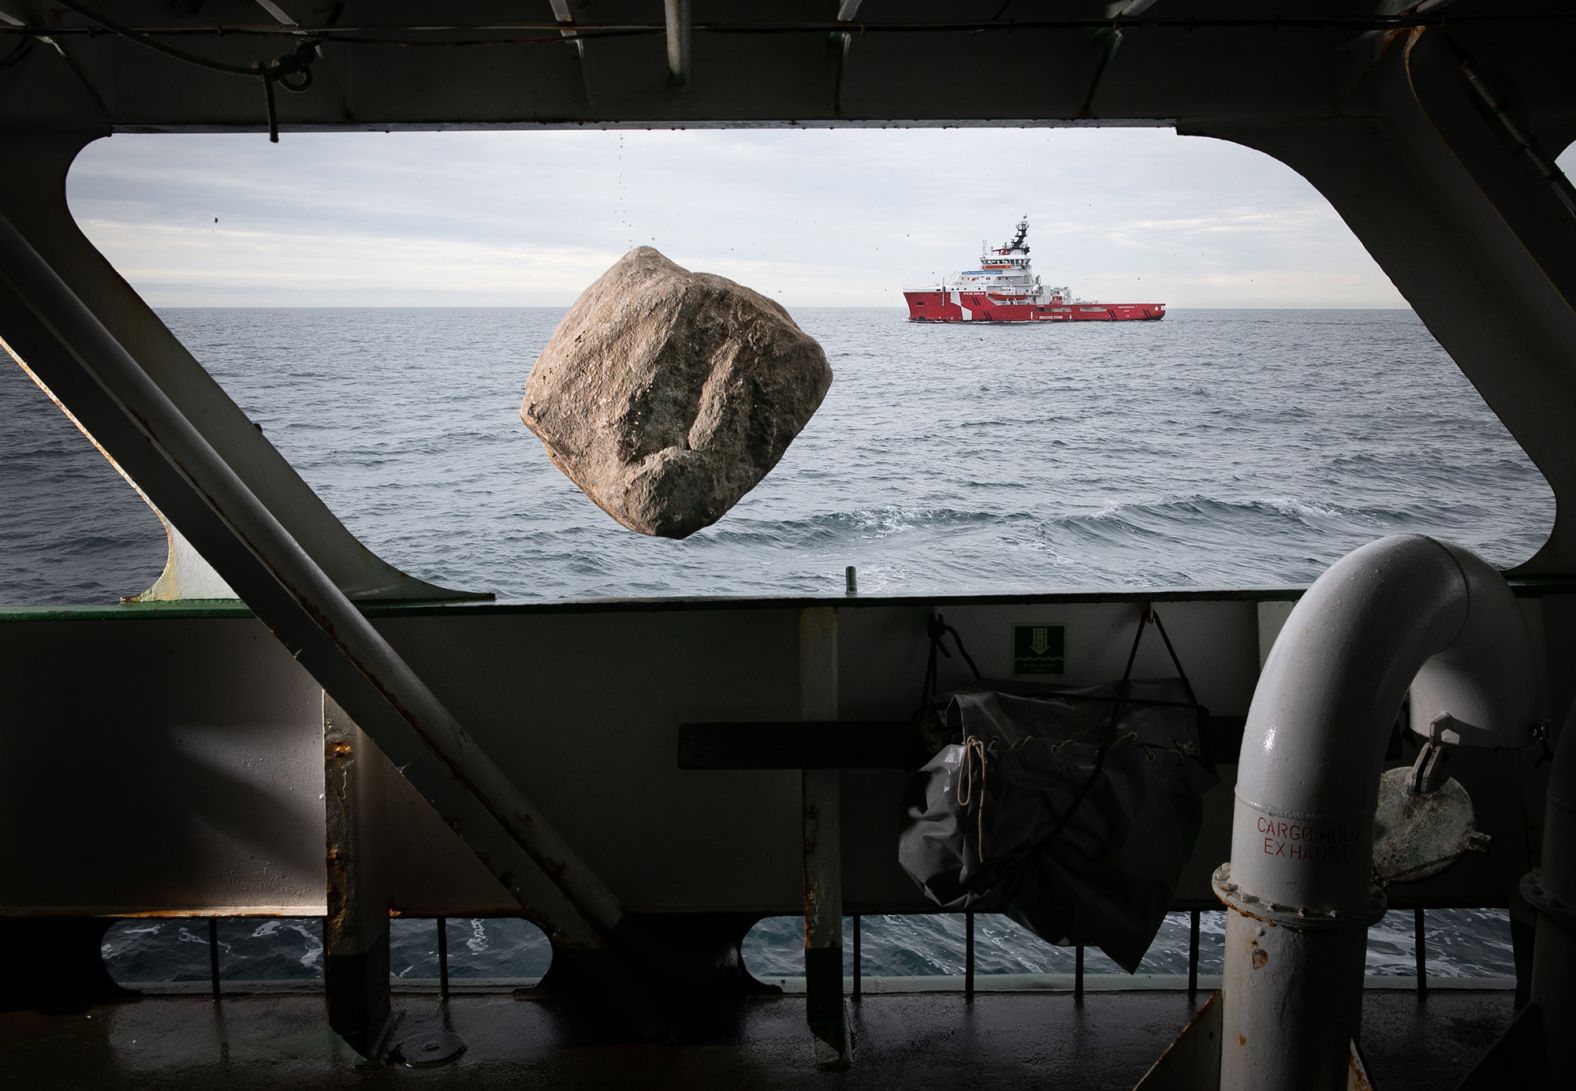 <strong>Suzanne Plunkett, based in London:</strong> This image shows a boulder plummeting past a window on board the Greenpeace ship, Esperanza, in the English Channel. These boulders are carefully deployed to deter <a href="index.php?page=&url=https%3A%2F%2Fwww.cnn.com%2F2021%2F12%2F13%2Fworld%2Fseahorses-bottom-trawling-amanda-vincent-c2e-spc-intl%2Findex.html" target="_blank">destructive industrial "bottom trawlers"</a> from breaching fishing bans in designated Marine Protected Areas. In the background, you can see a patrol boat from the UK government's Marine Management Organisation keeping an eye on the Esperanza.<br />   <br />There's only a split second where the boulder appears to hover in the center of the frame, meanwhile the ship is constantly moving, so getting the patrol boat in the frame and the sun at the right angle was a challenge. Keeping the cameras dry was also an issue — I covered my lights with hotel shower caps to spare them from the enormous splash that the stones created.<br />   <br />Collaborating on a campaign that I really care about with an organization at the forefront of tackling environmental issues makes me feel very proud and motivated to capture eye-catching photographs that create awareness of how fragile our planet is and what needs to be done to protect it.